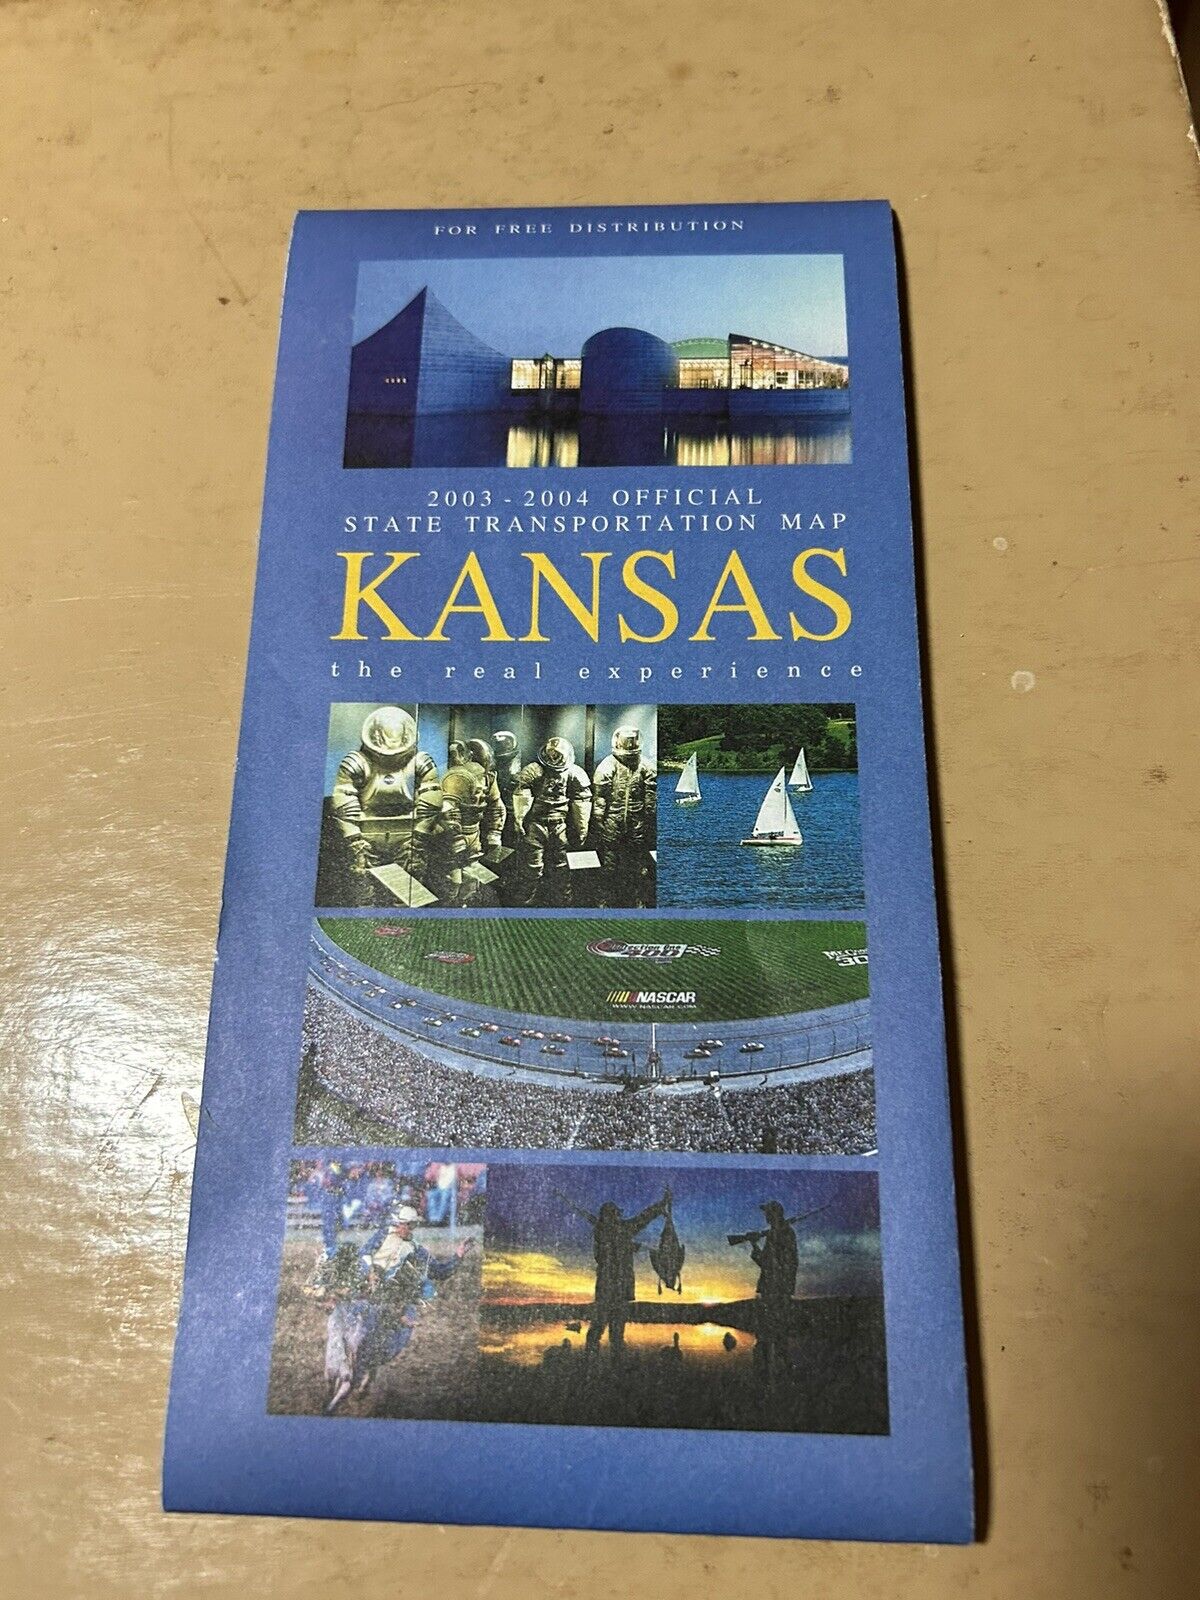 2003-2004 OFFICIAL STATE TRANSPORTATION MAP KANSAS-THE REAL EXPERIENCE 2003-2004